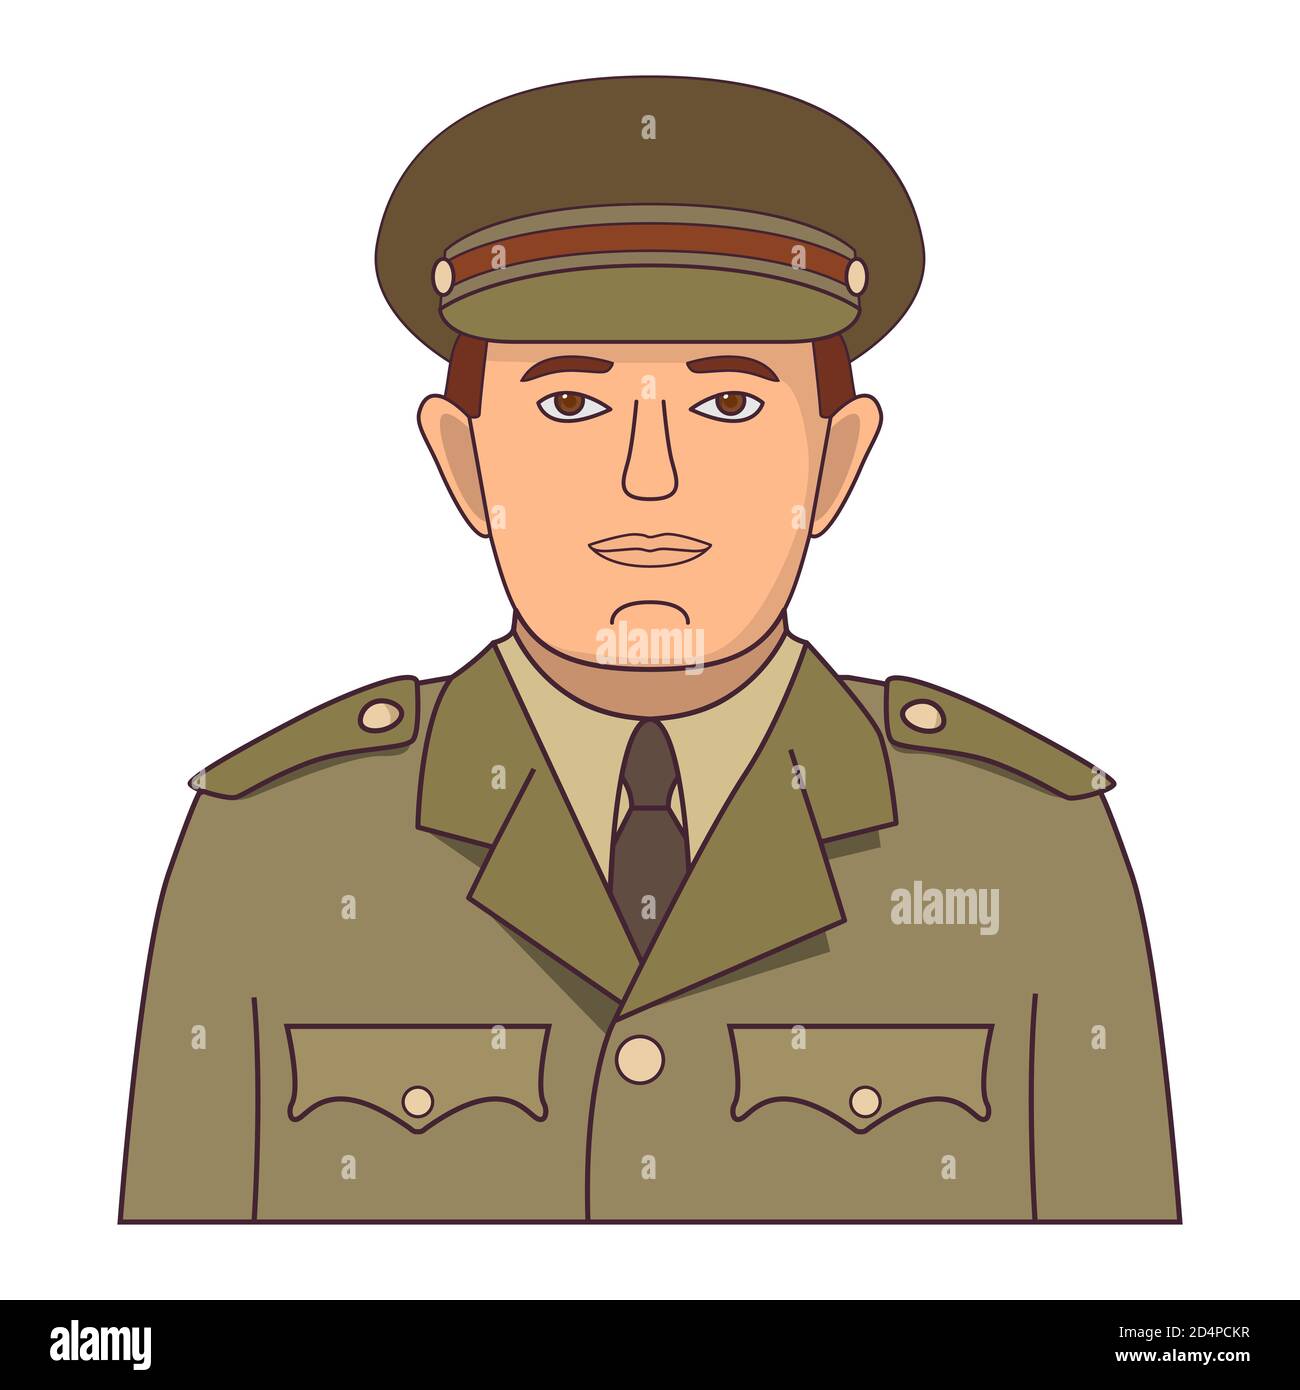 Army man soldier cartoon character .Military people, An officer in uniform and a cap. Stock Vector